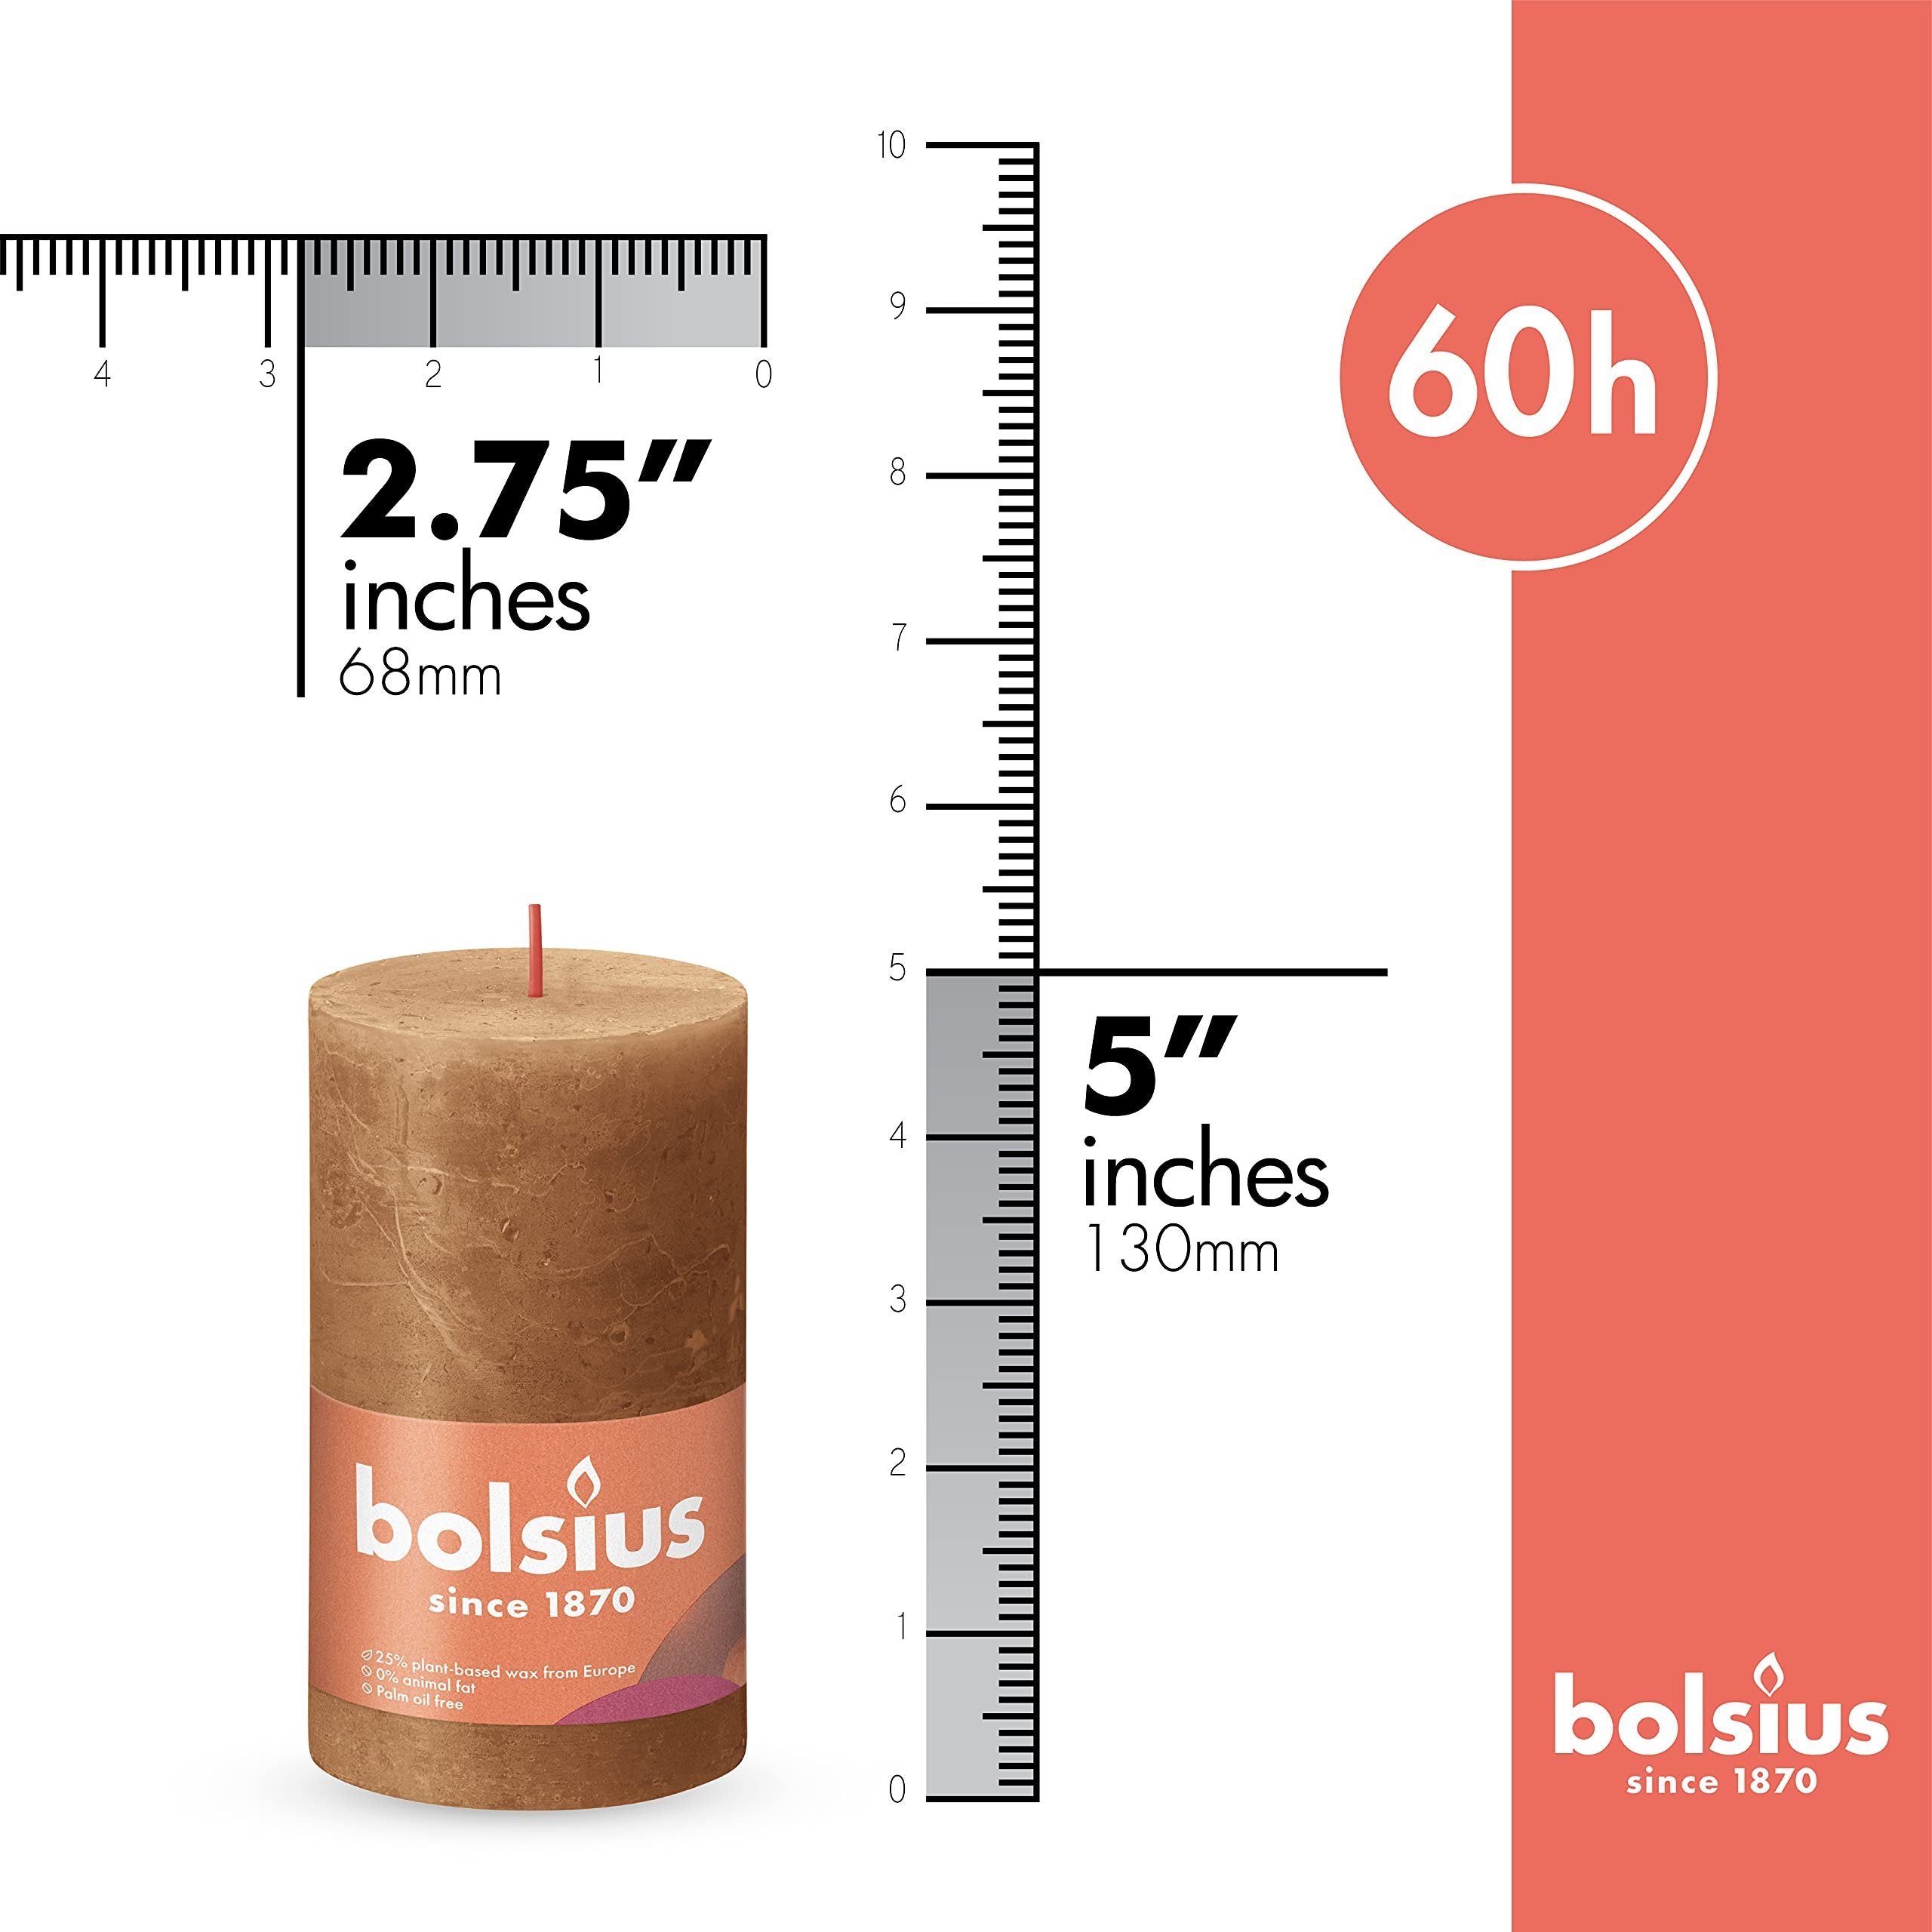 BOLSIUS 4 Pack Spice Brown Rustic Pillar Candles - 2.75 X 5 Inches - Premium European Quality - Includes Natural Plant-Based Wax - Unscented Dripless Smokeless 60 Hour Party and Wedding Candles